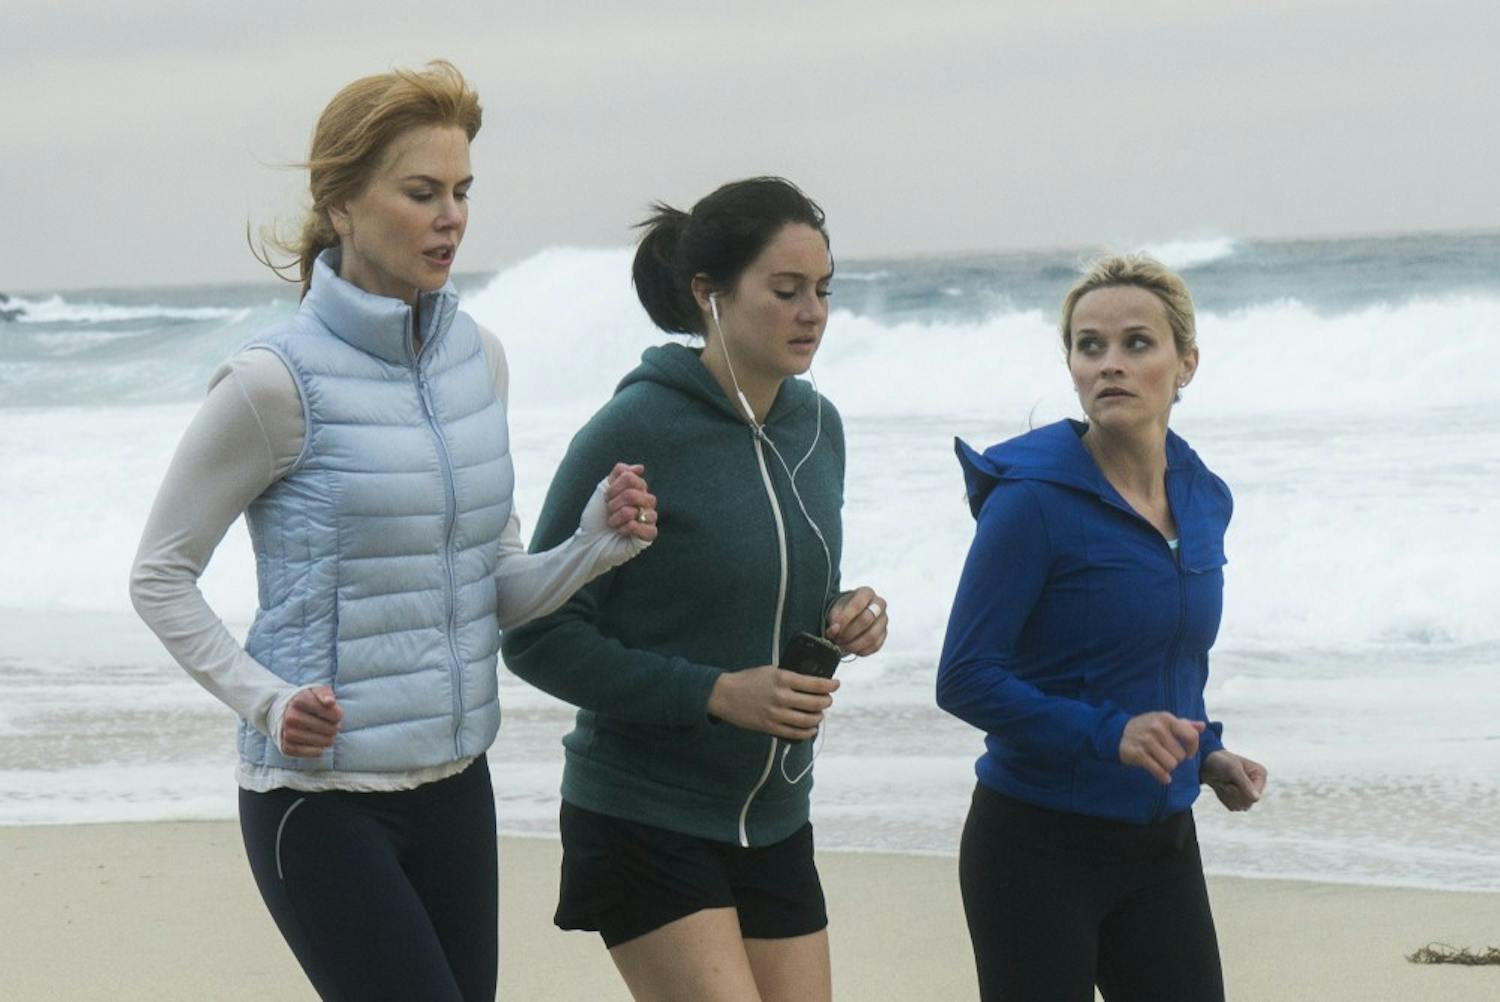 HBO's "Big Little Lies" was TV's summer hit, with a standout performance from Nicole Kidman.